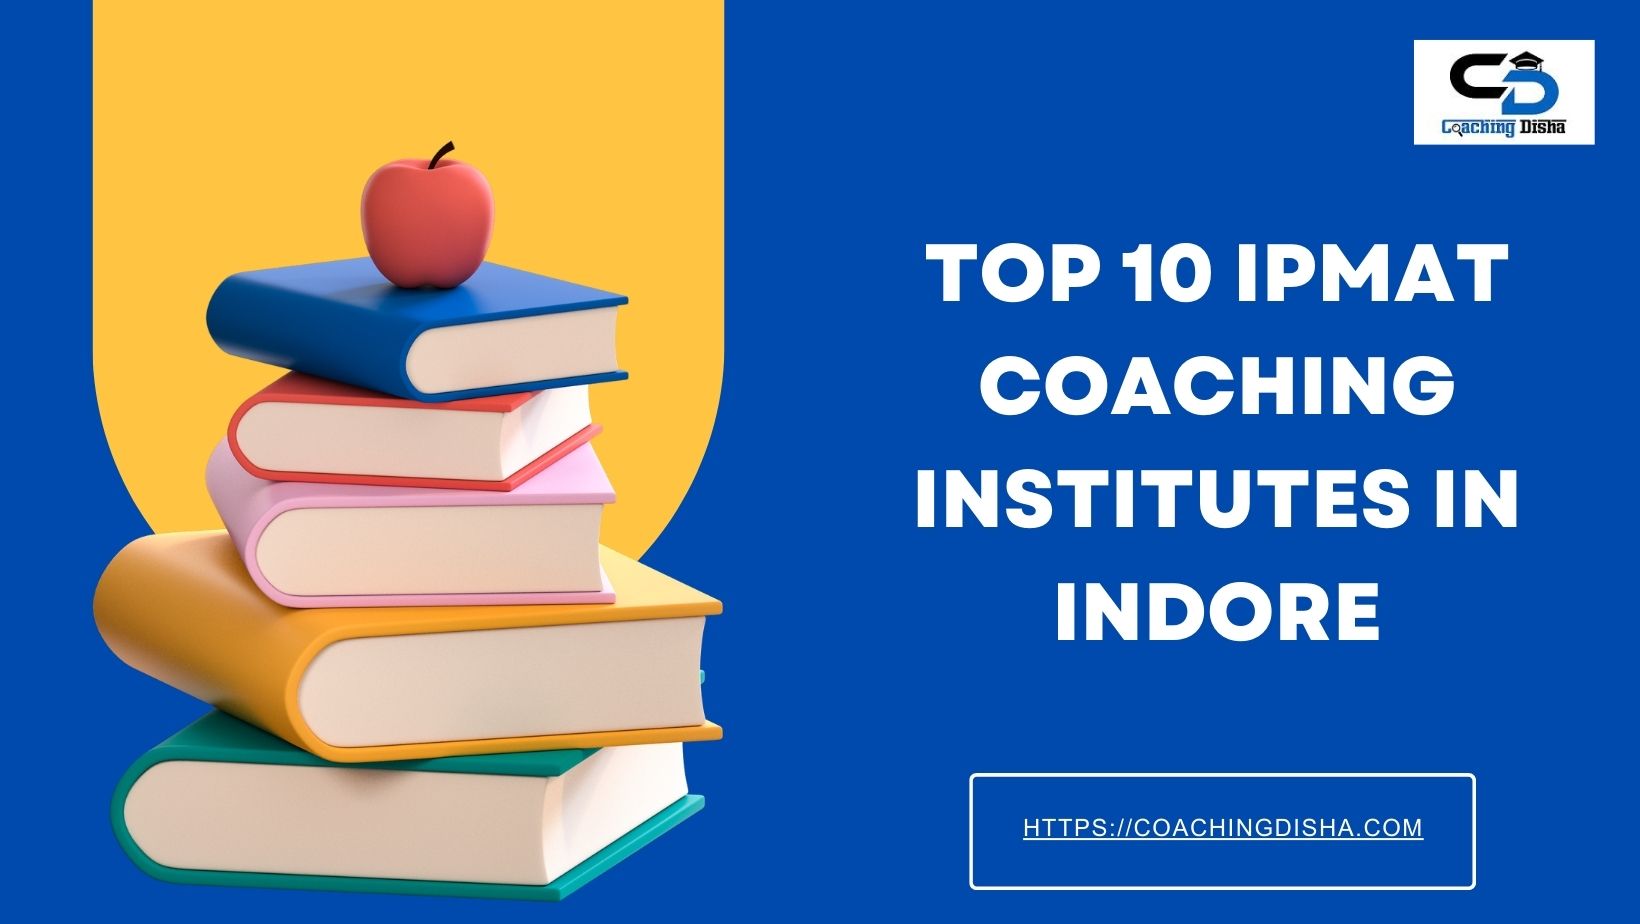 Test 10 IPMAT Coaching Ins****utes in Indore: Fees, Contact Details